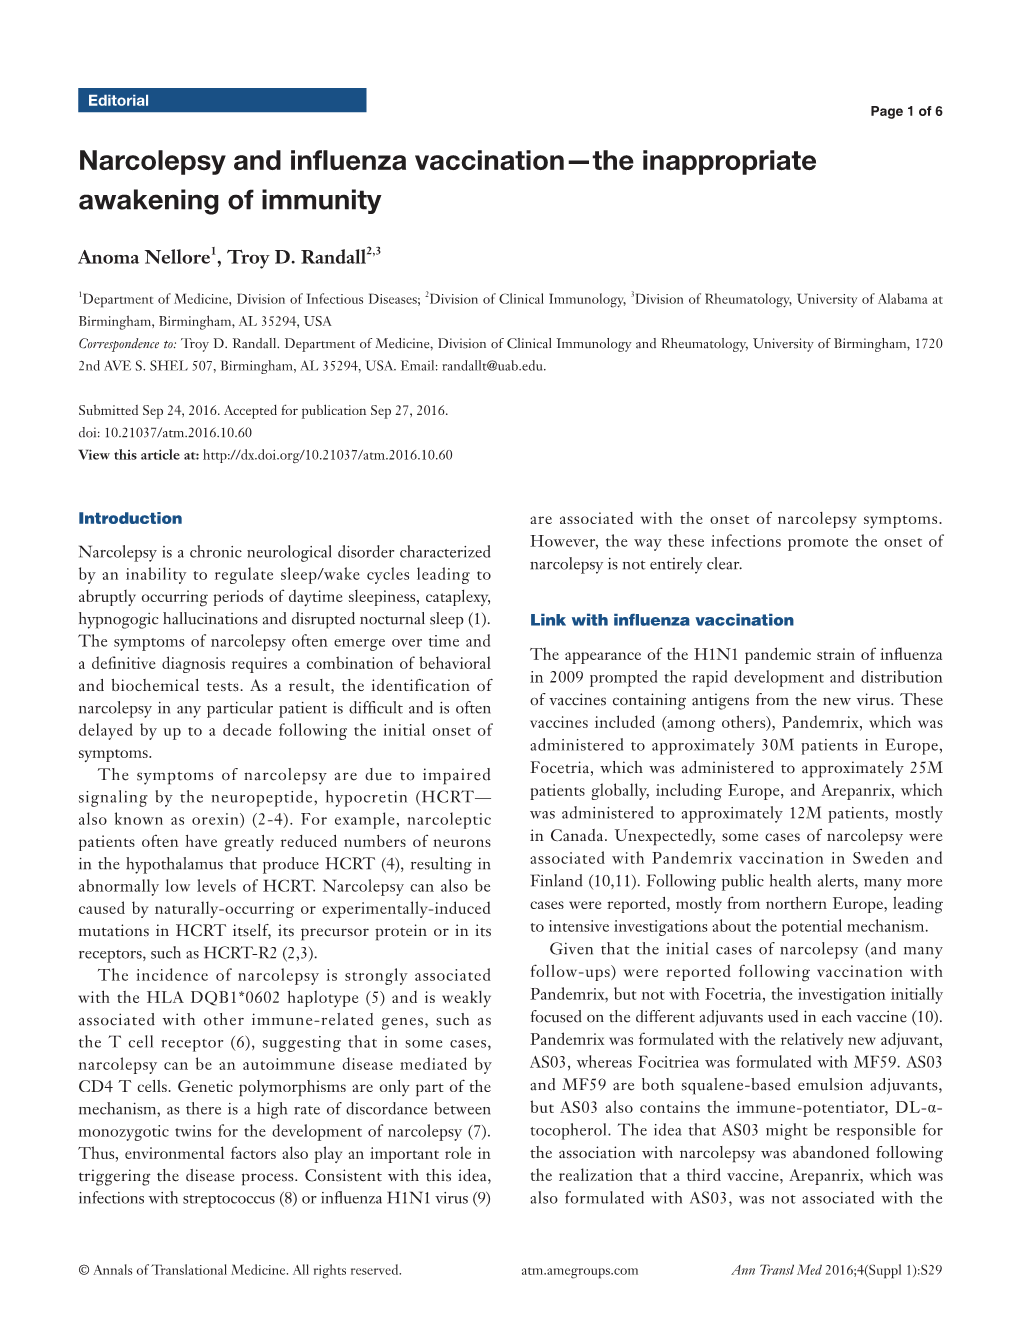 Narcolepsy and Influenza Vaccination—The Inappropriate Awakening of Immunity